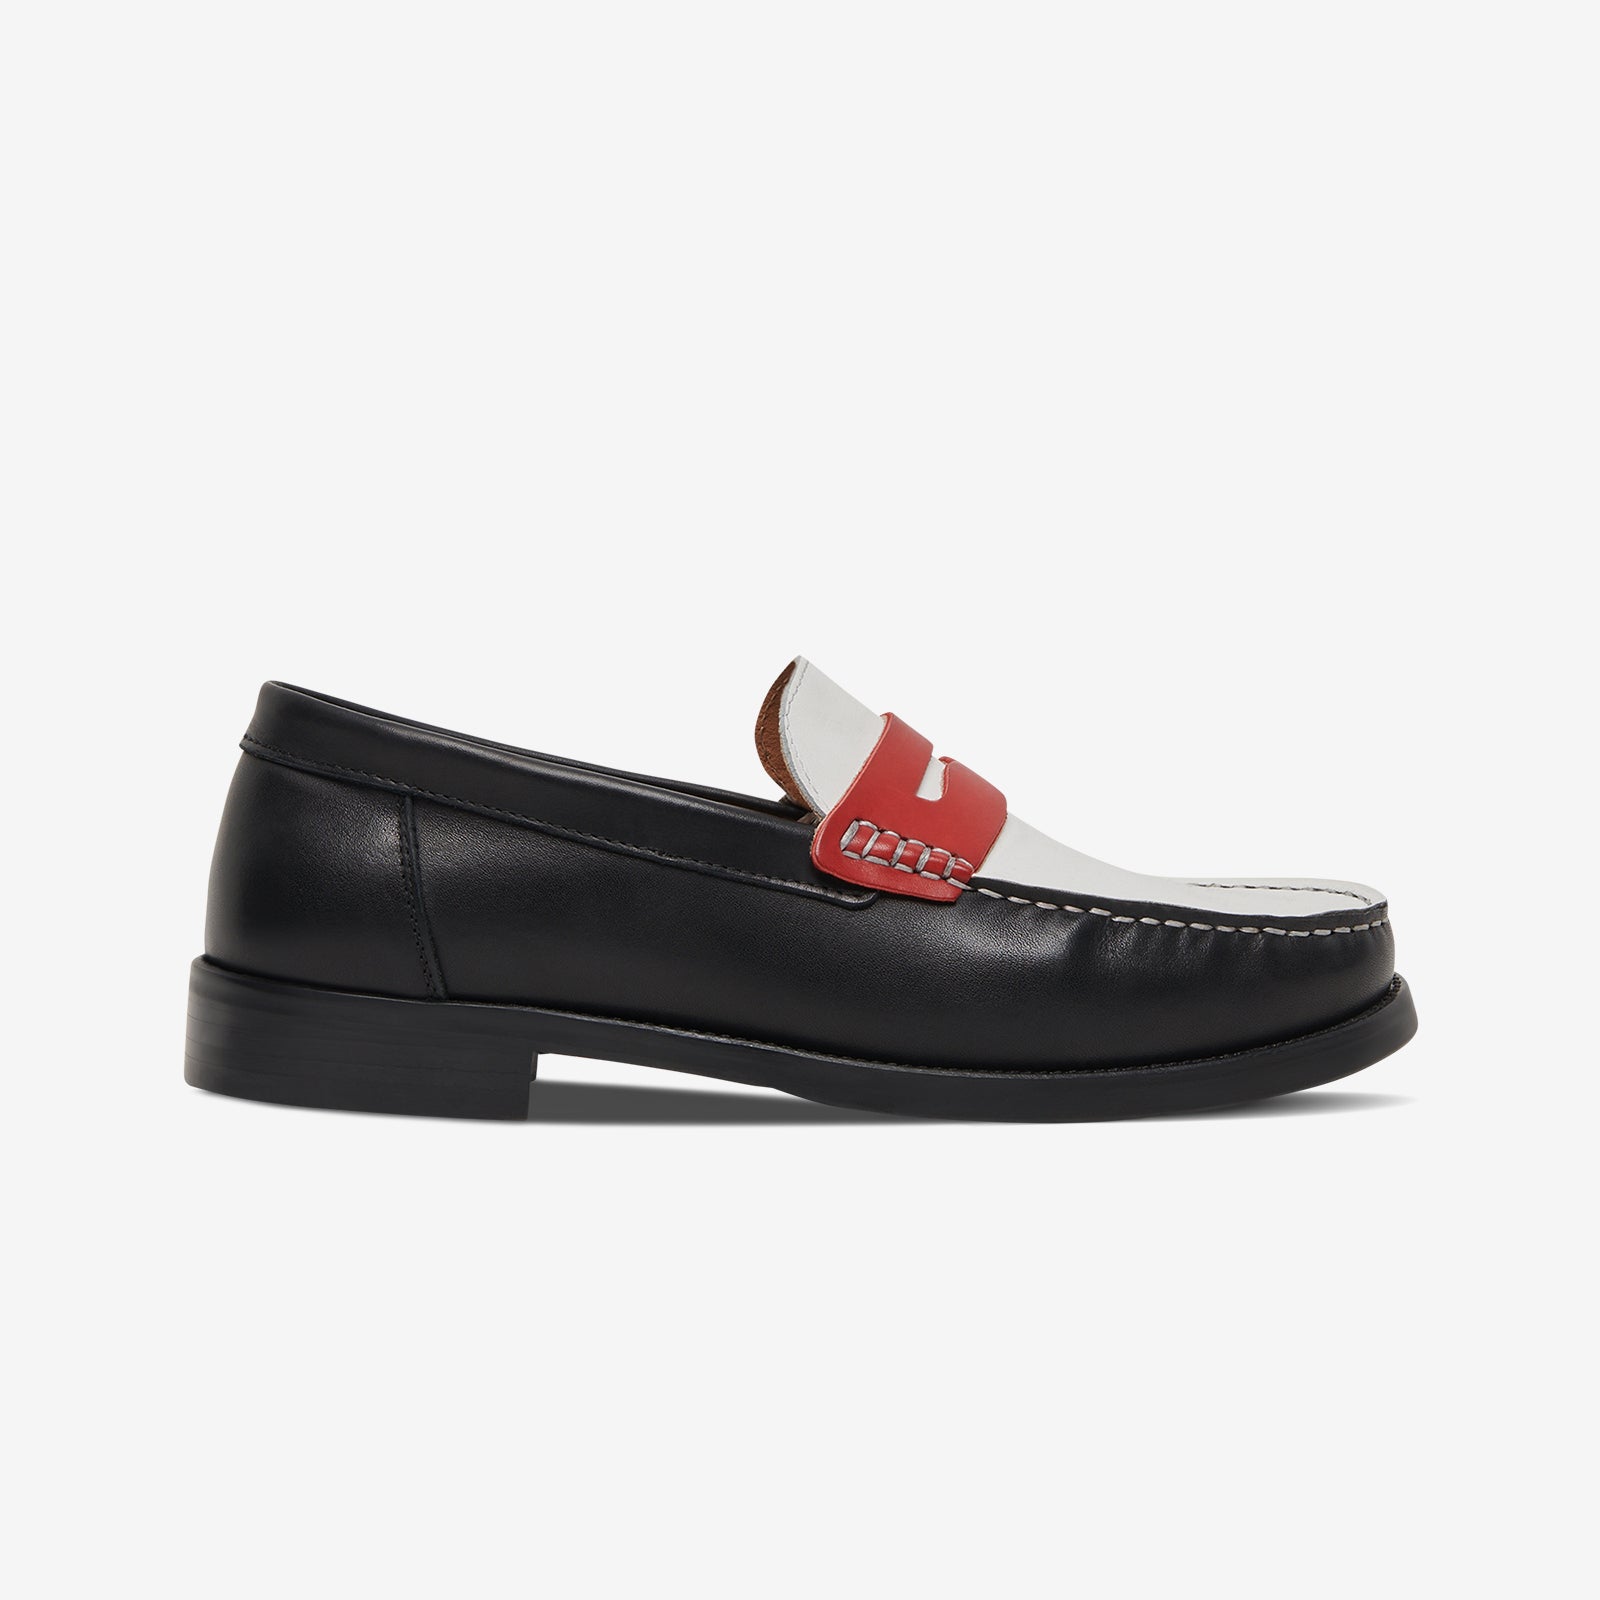 Greats - The Essex Penny Loafer Retro Red/Black - Men's – GREATS